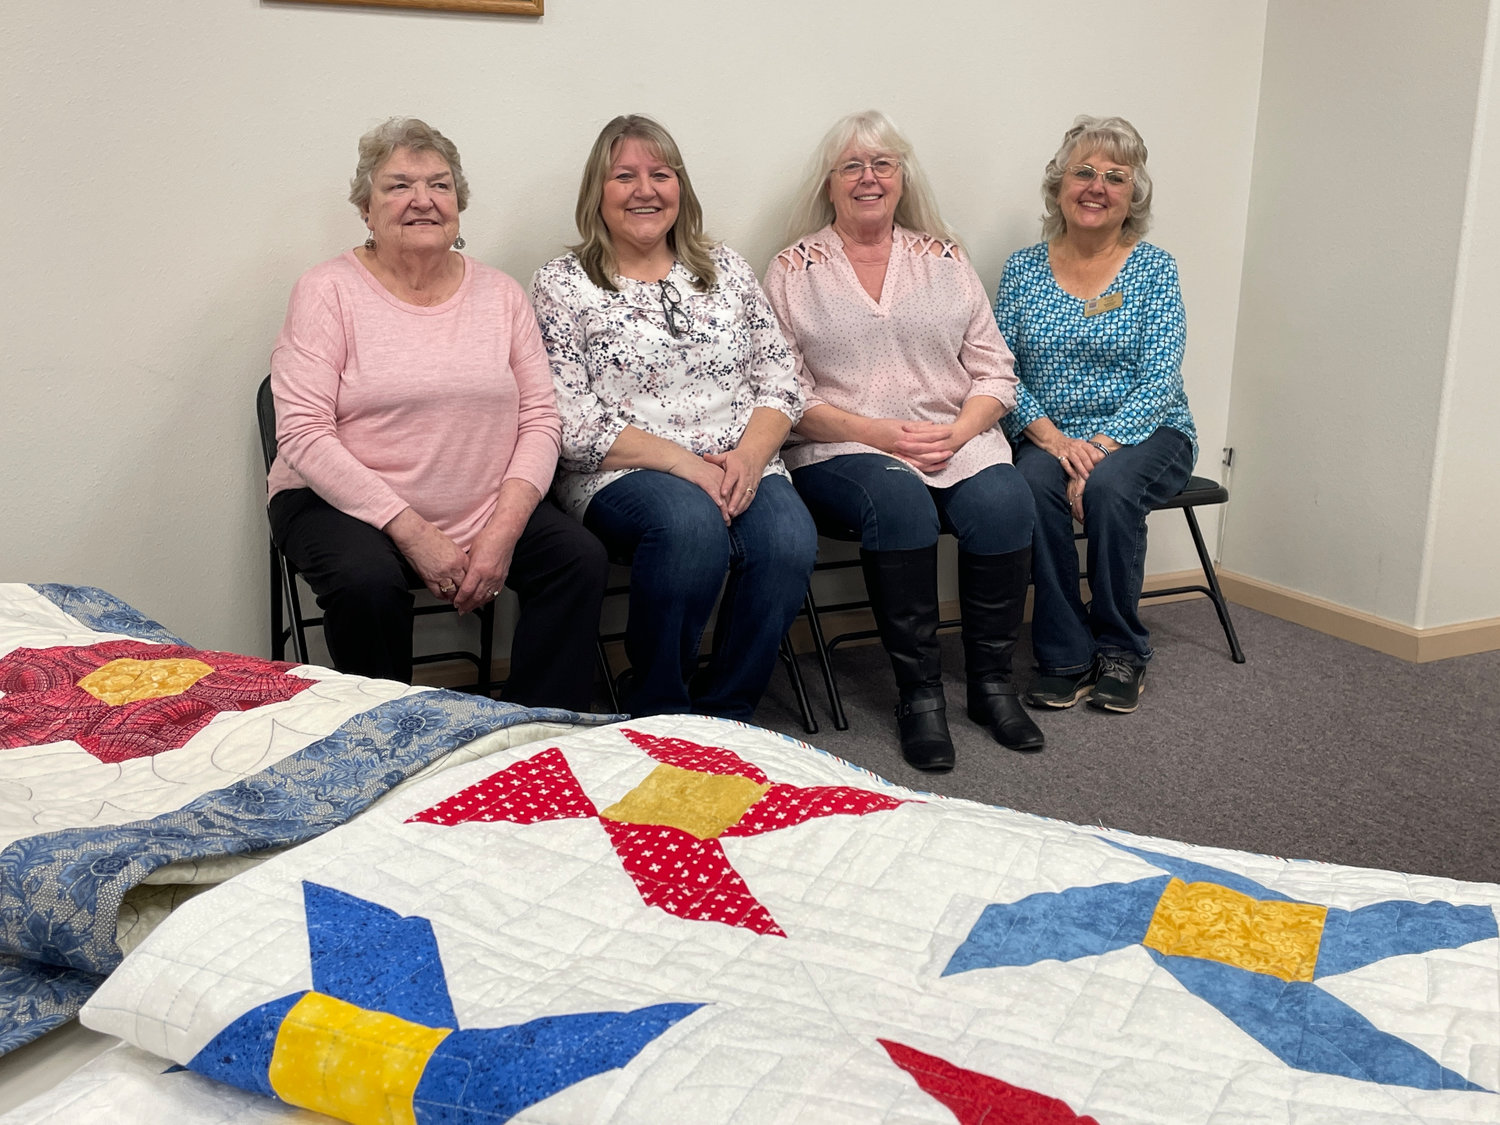 Quilters, from left, Donna Moody, Kristi Gerard, Connie Carter and Debbie Aust.